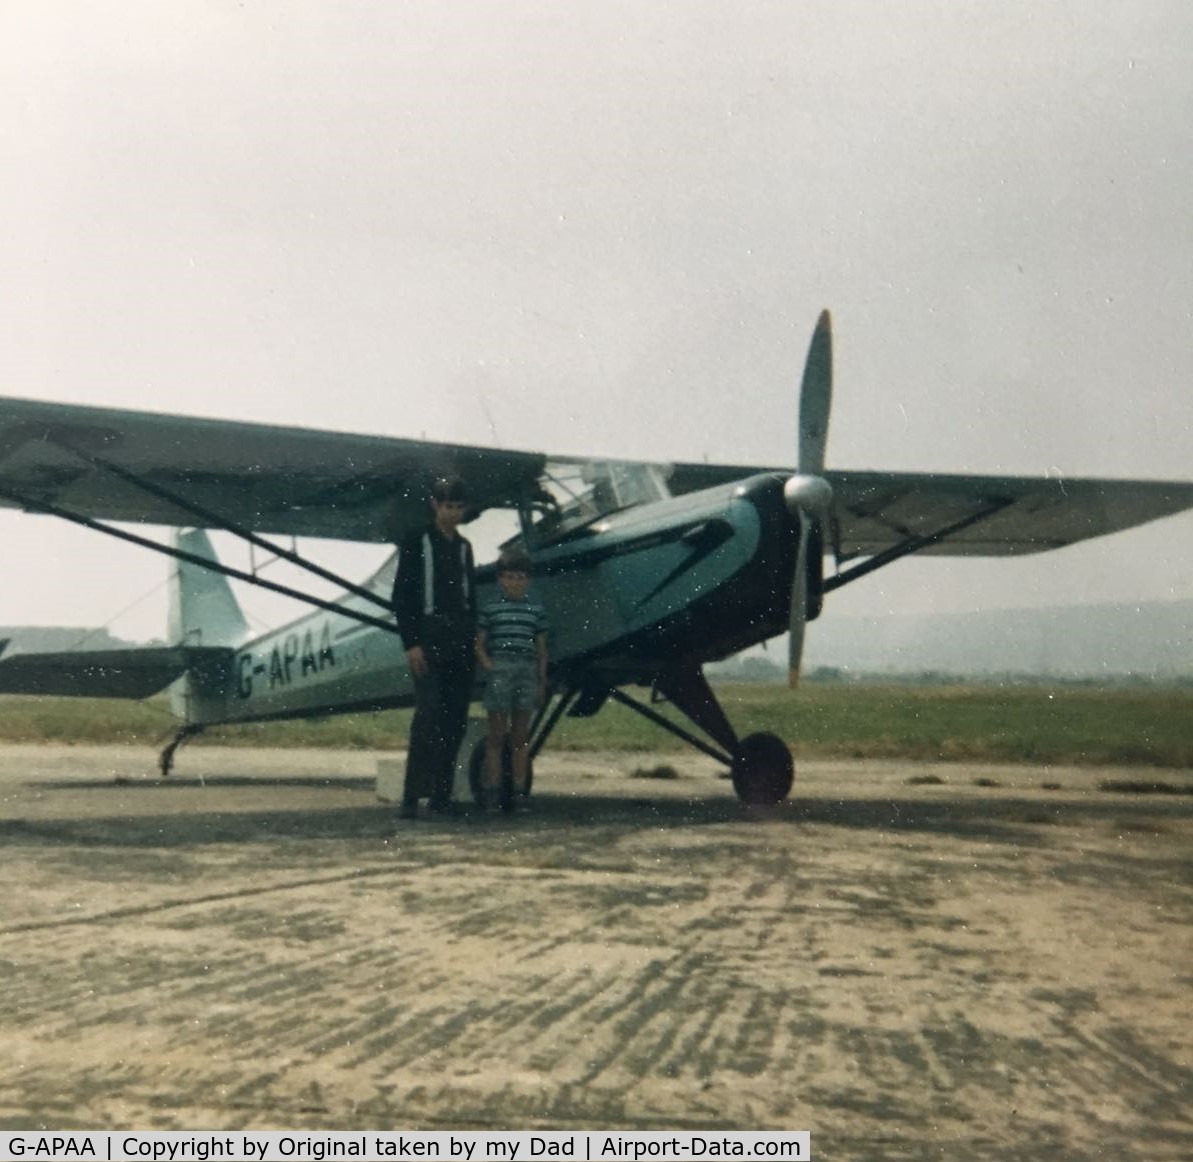 G-APAA, 1956 Auster J-5R Alpine C/N 3303, This is me and my older brother in 1966 or 67, when we had our first ever flight, at Weston-Super-Mare (or possibly Bristol?) with my Dad, who was a former RAF LAC in WW2 who maintained Hurricanes and other planes in North Africa and Italy